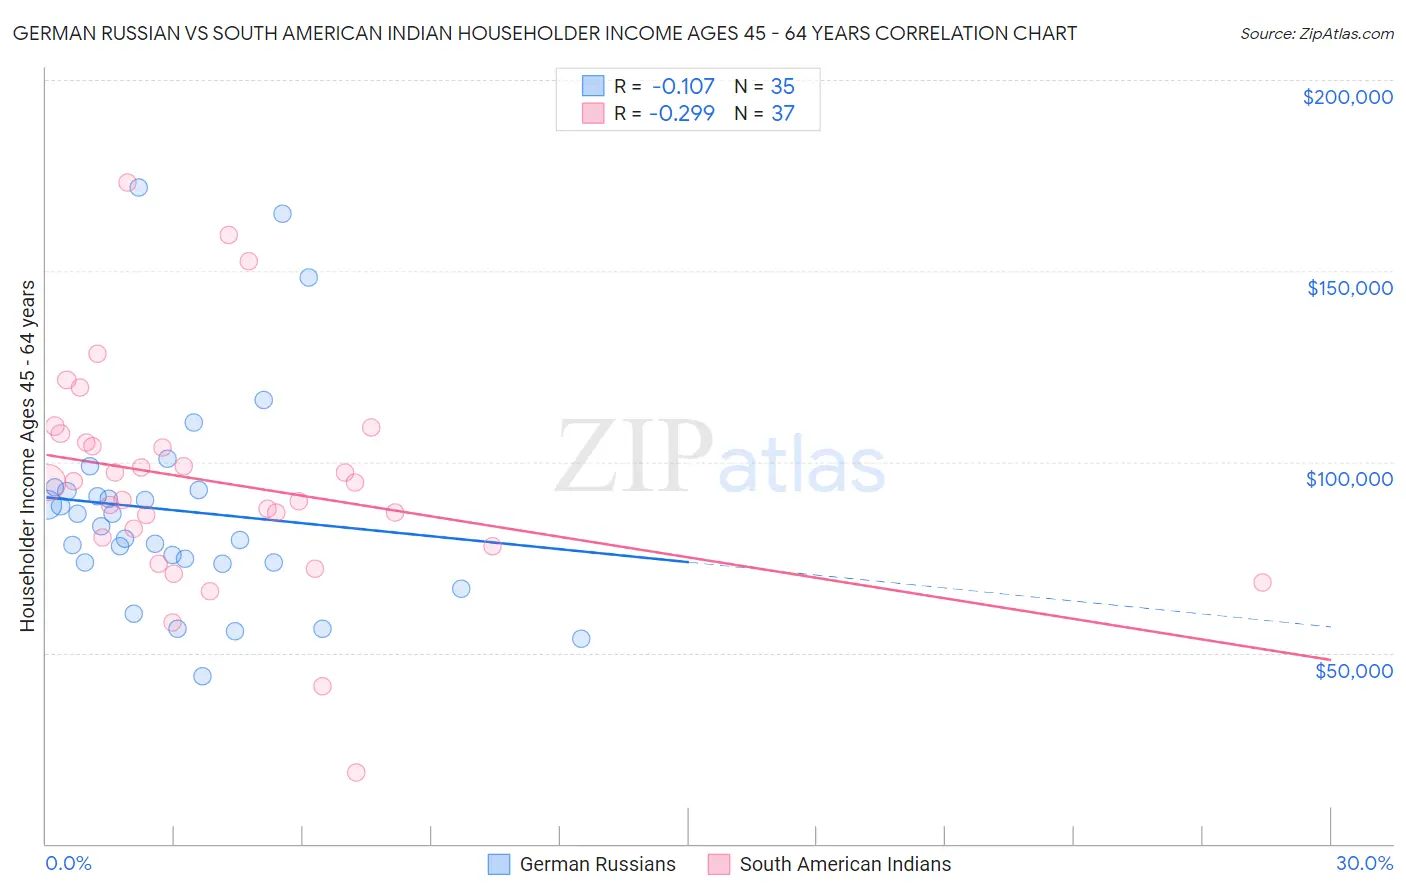 German Russian vs South American Indian Householder Income Ages 45 - 64 years